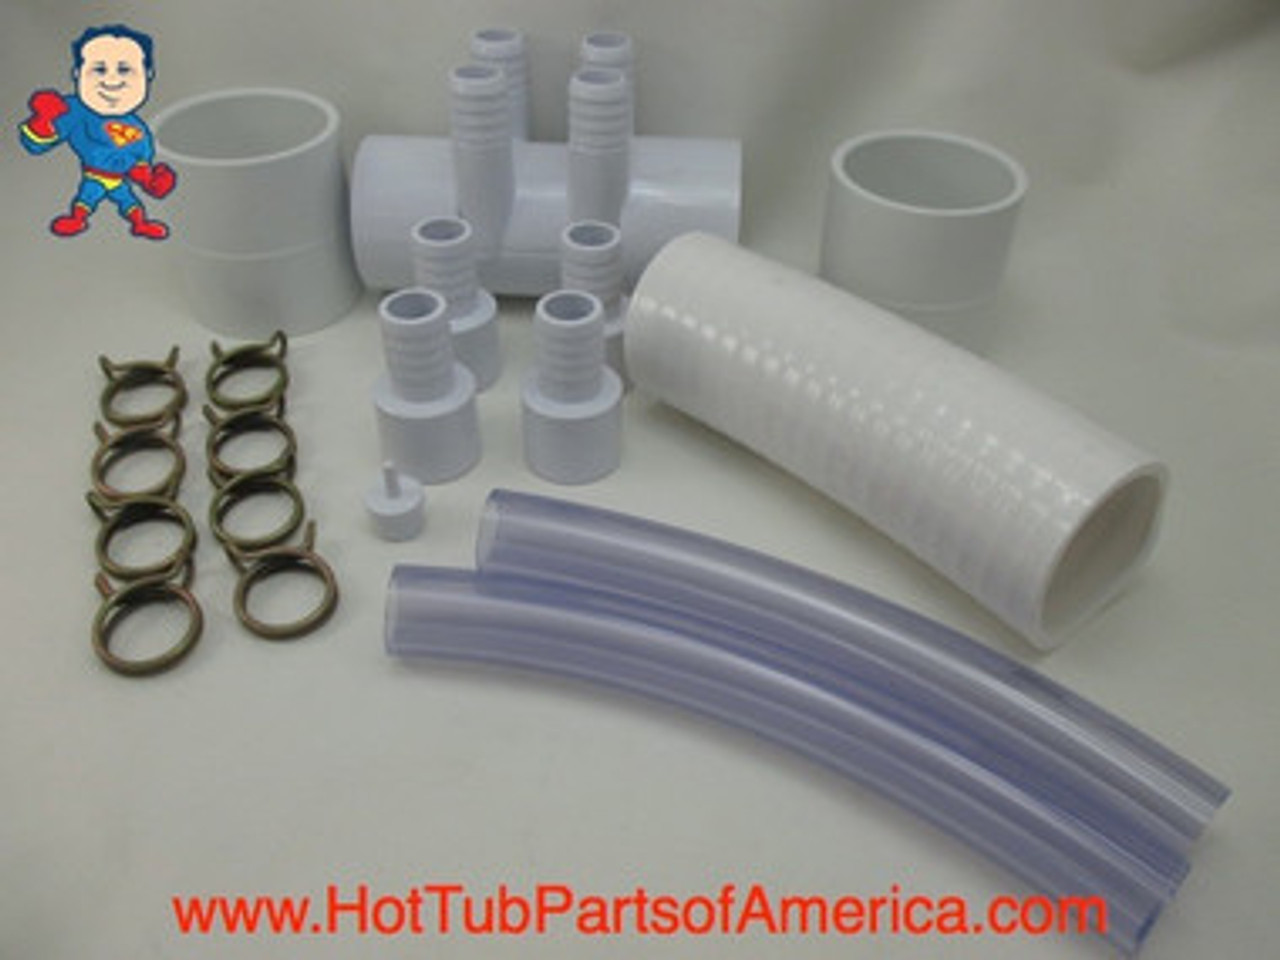 RENU Manifold Hot Tub Spa Old To New Style 2"spg x (4)3/4" Coupler Glue Kit Video How To